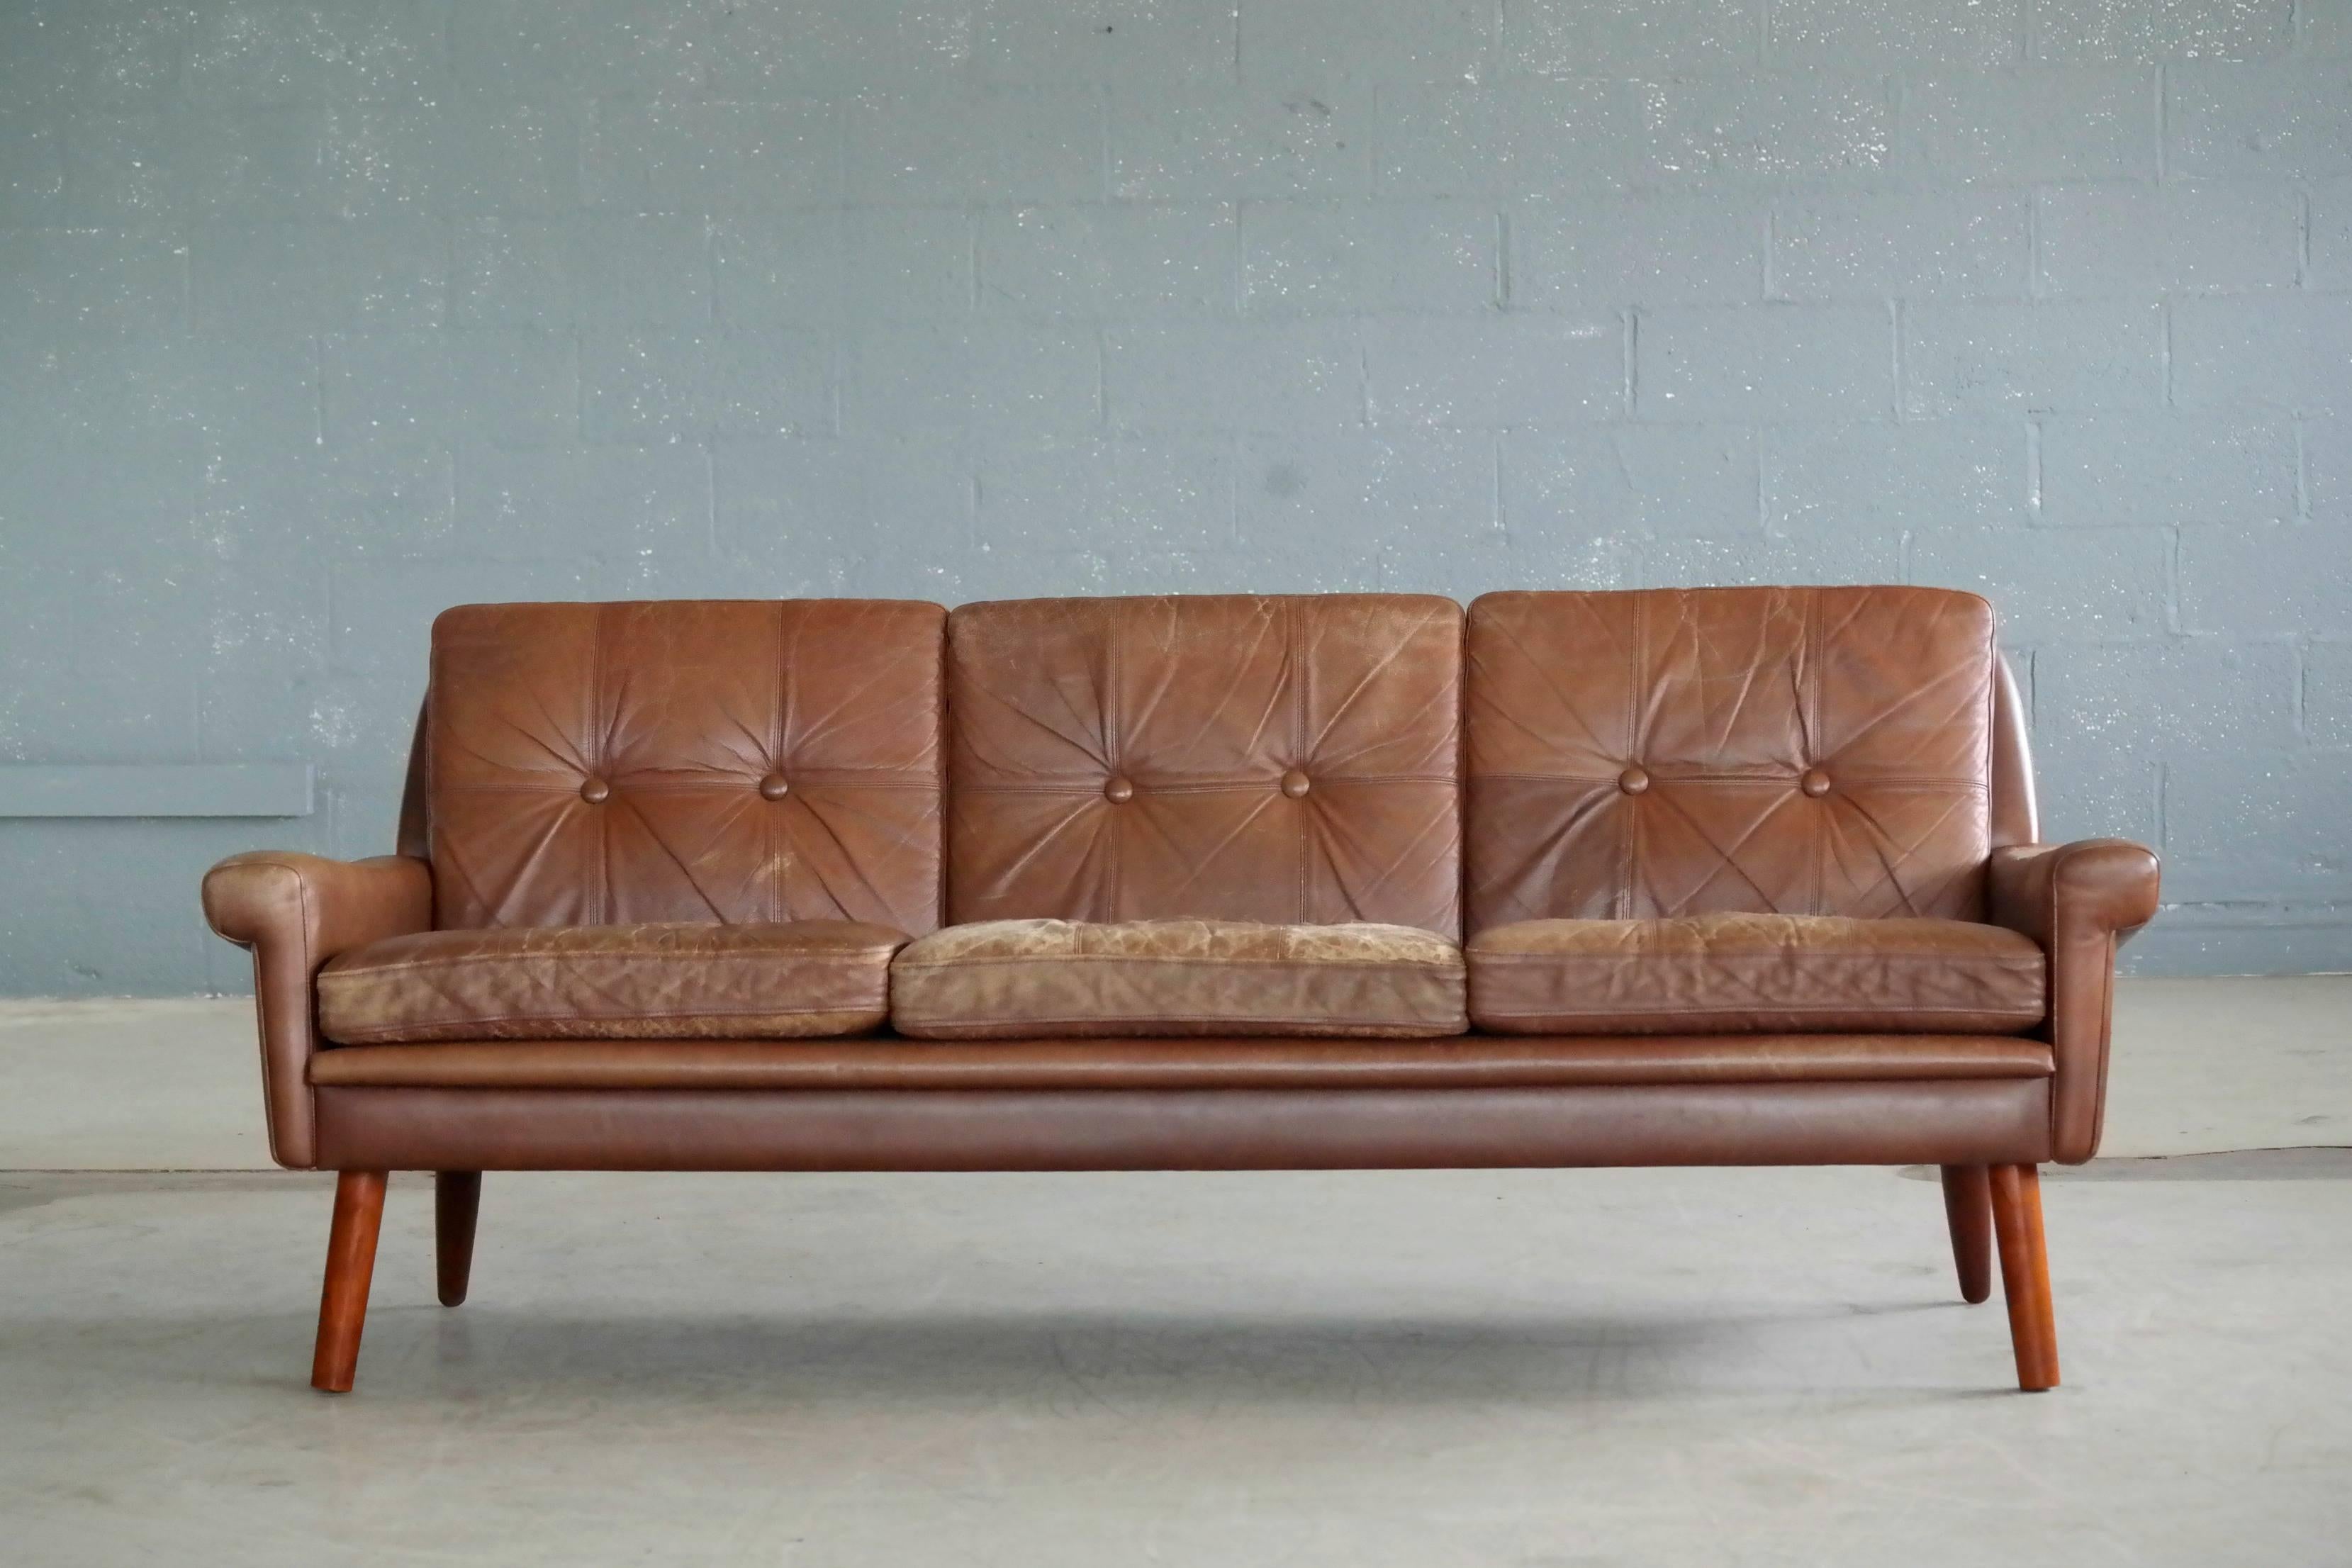 Classic Sven Skipper designed sofa in brown leather and tufted foam filled cushions raised on teak legs. The leather exhibits a nice well worn look including color fading and patina to the armrests as well as back and seat cushions and is perfect